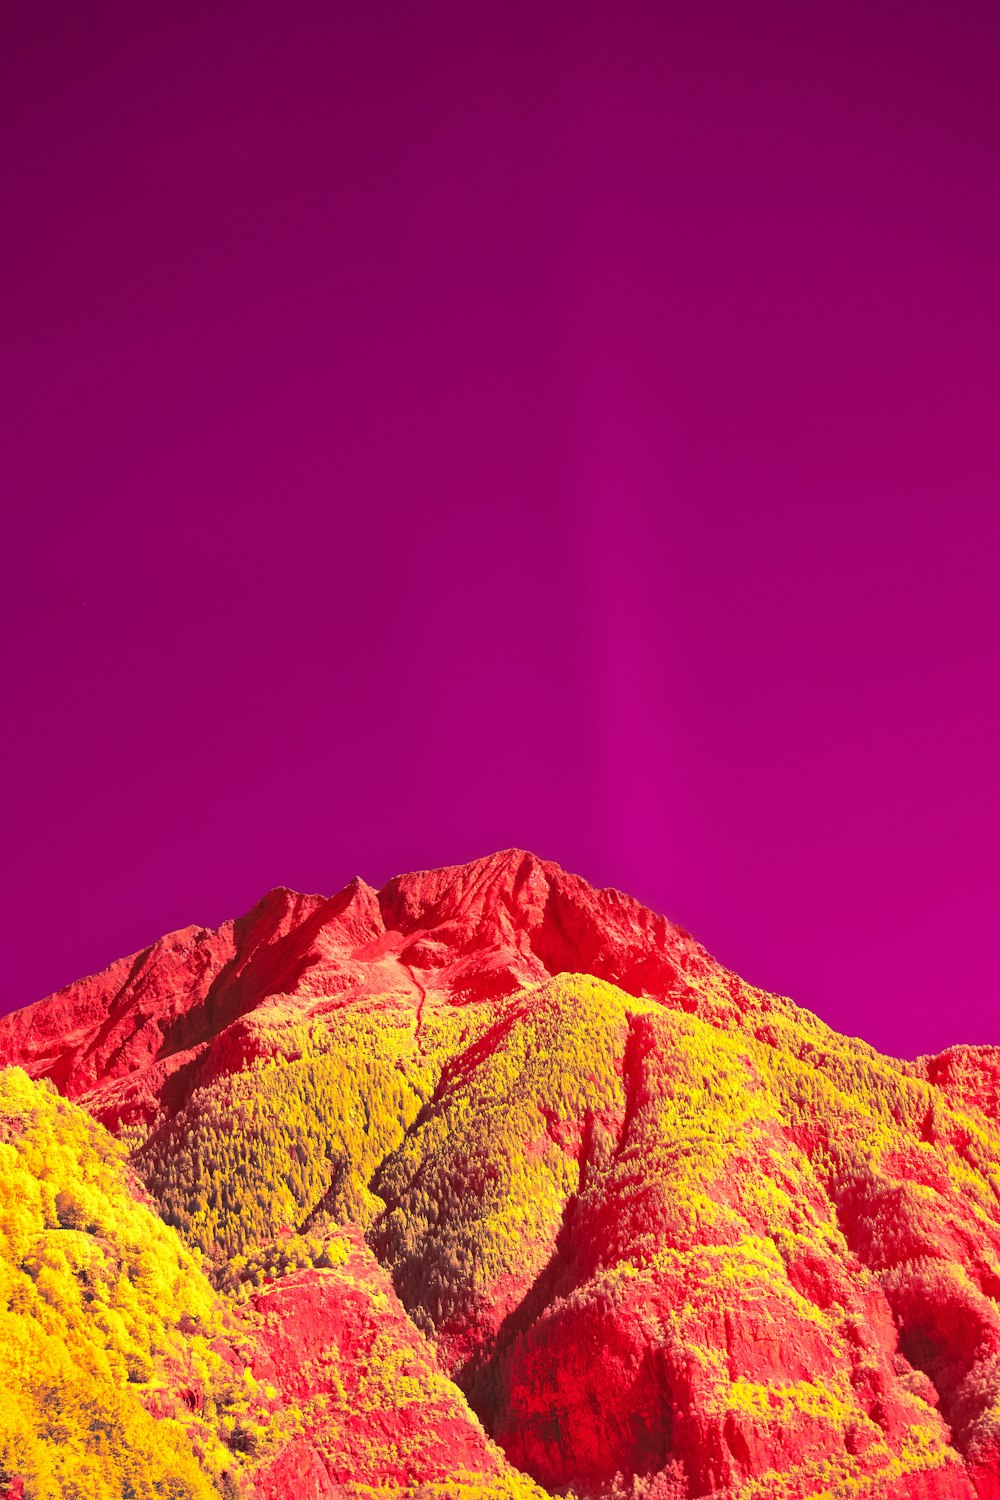 a mountain covered in yellow and red colored rocks